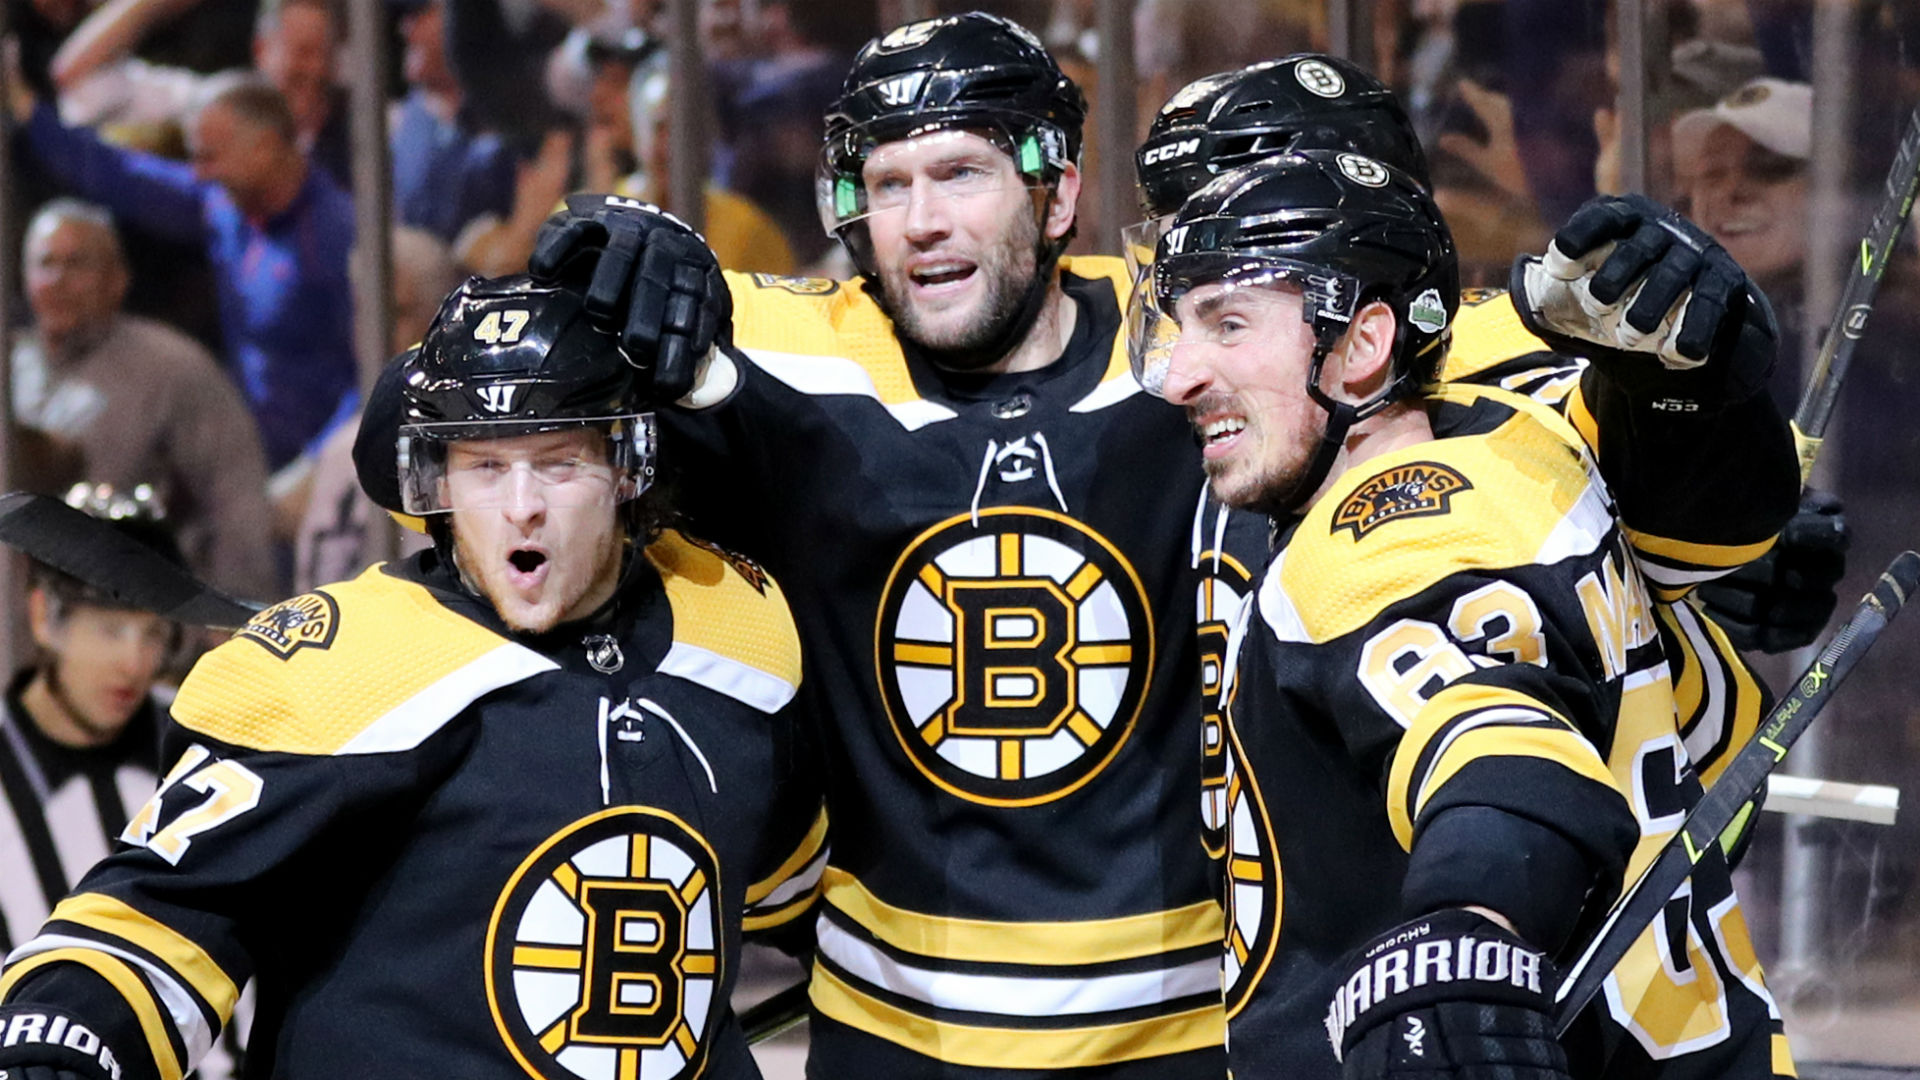 NHL playoffs 2018: Bruins finish off Maple Leafs in back-and-forth Game